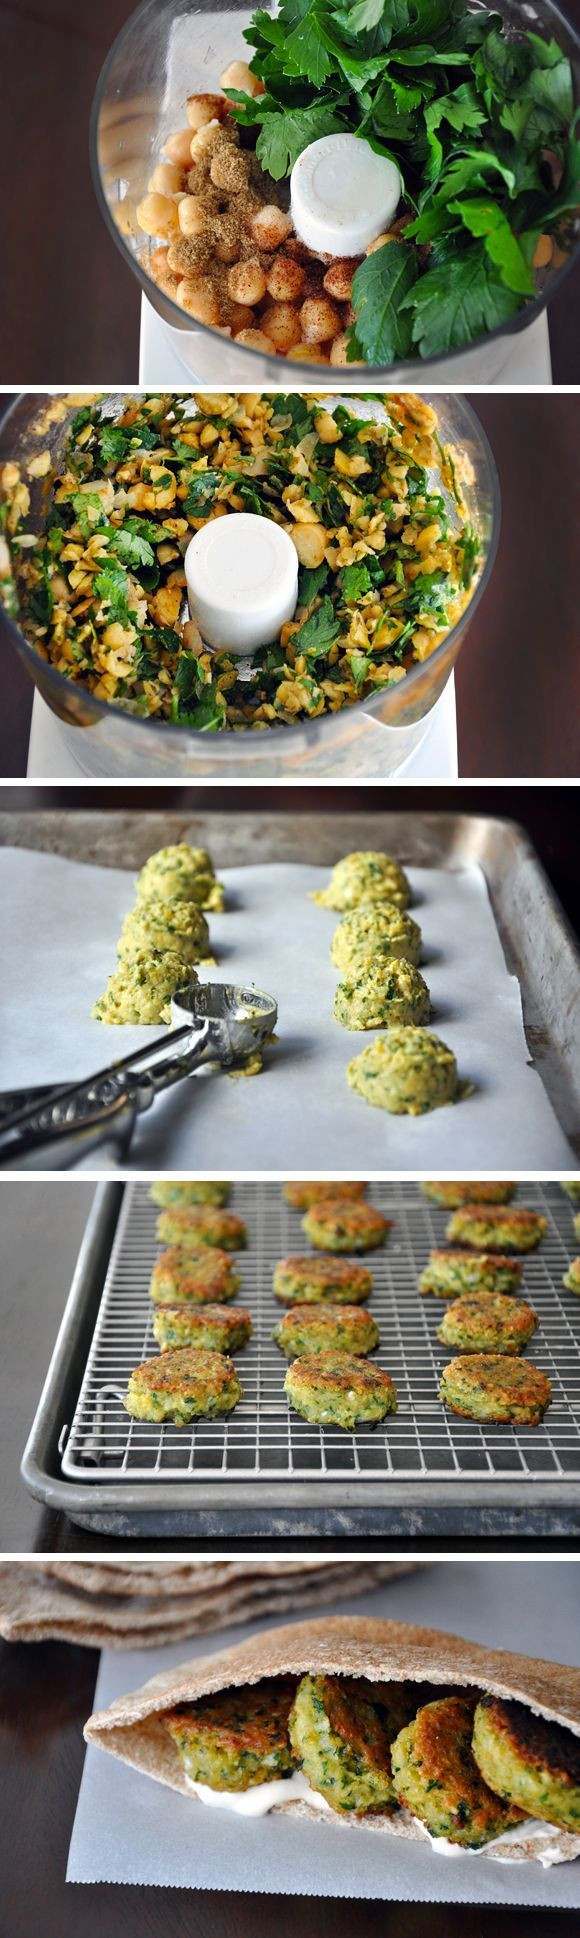 Homemade Falafel with Tahini Sauce | Just a Taste